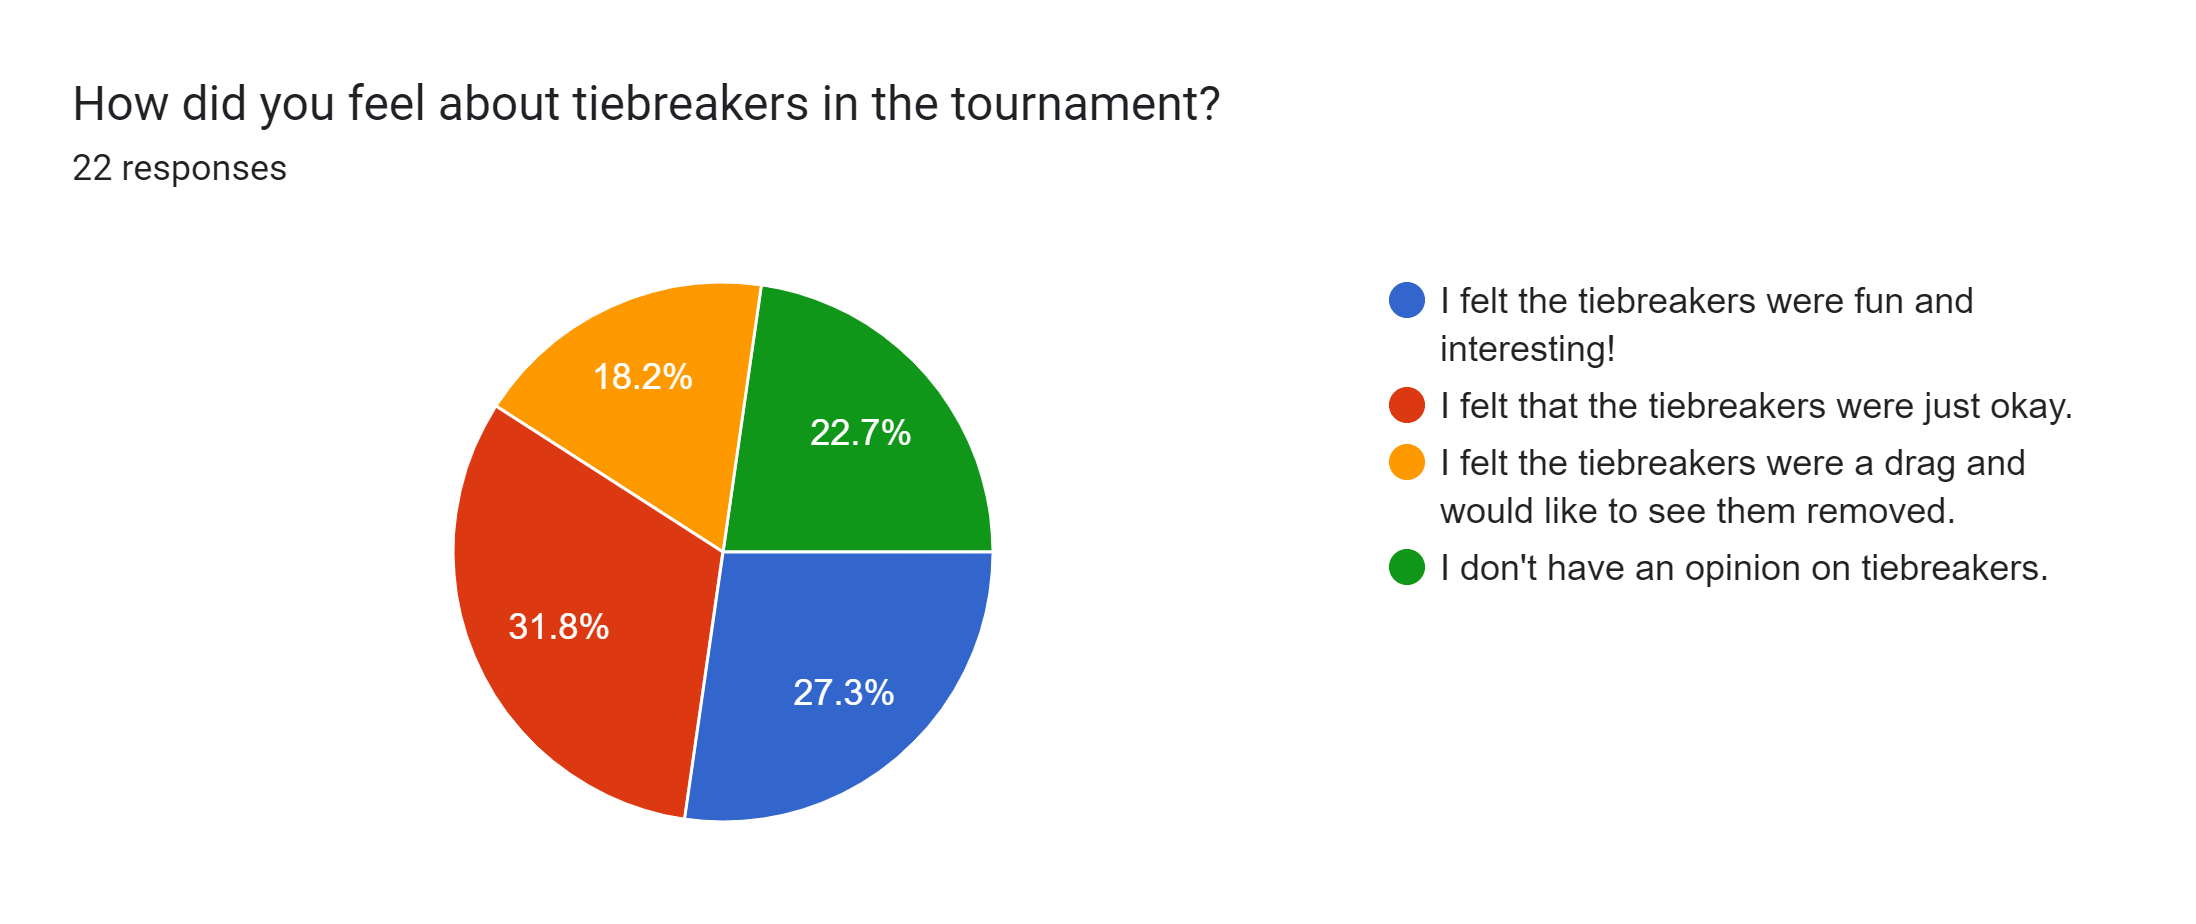 Forms response chart. Question title: How did you feel about tiebreakers in the tournament?. Number of responses: 22 responses.